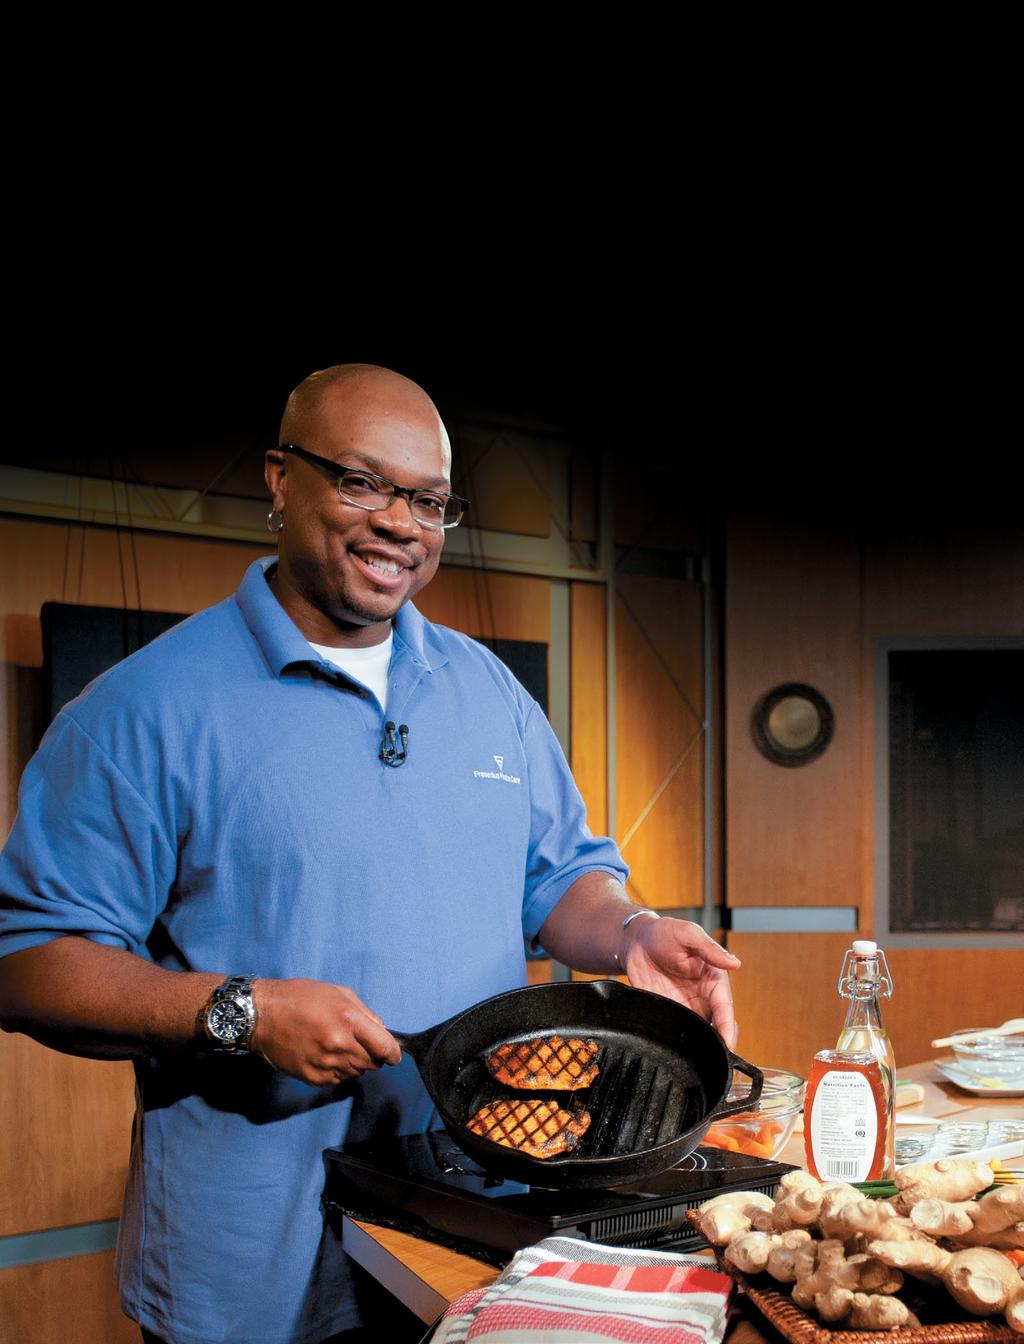 Savory Recipes for Renal Patients Food Network chef Aaron McCargo Jr, host of Big Daddy s House, has developed bold and flavorful dishes for patients with kidney disease across